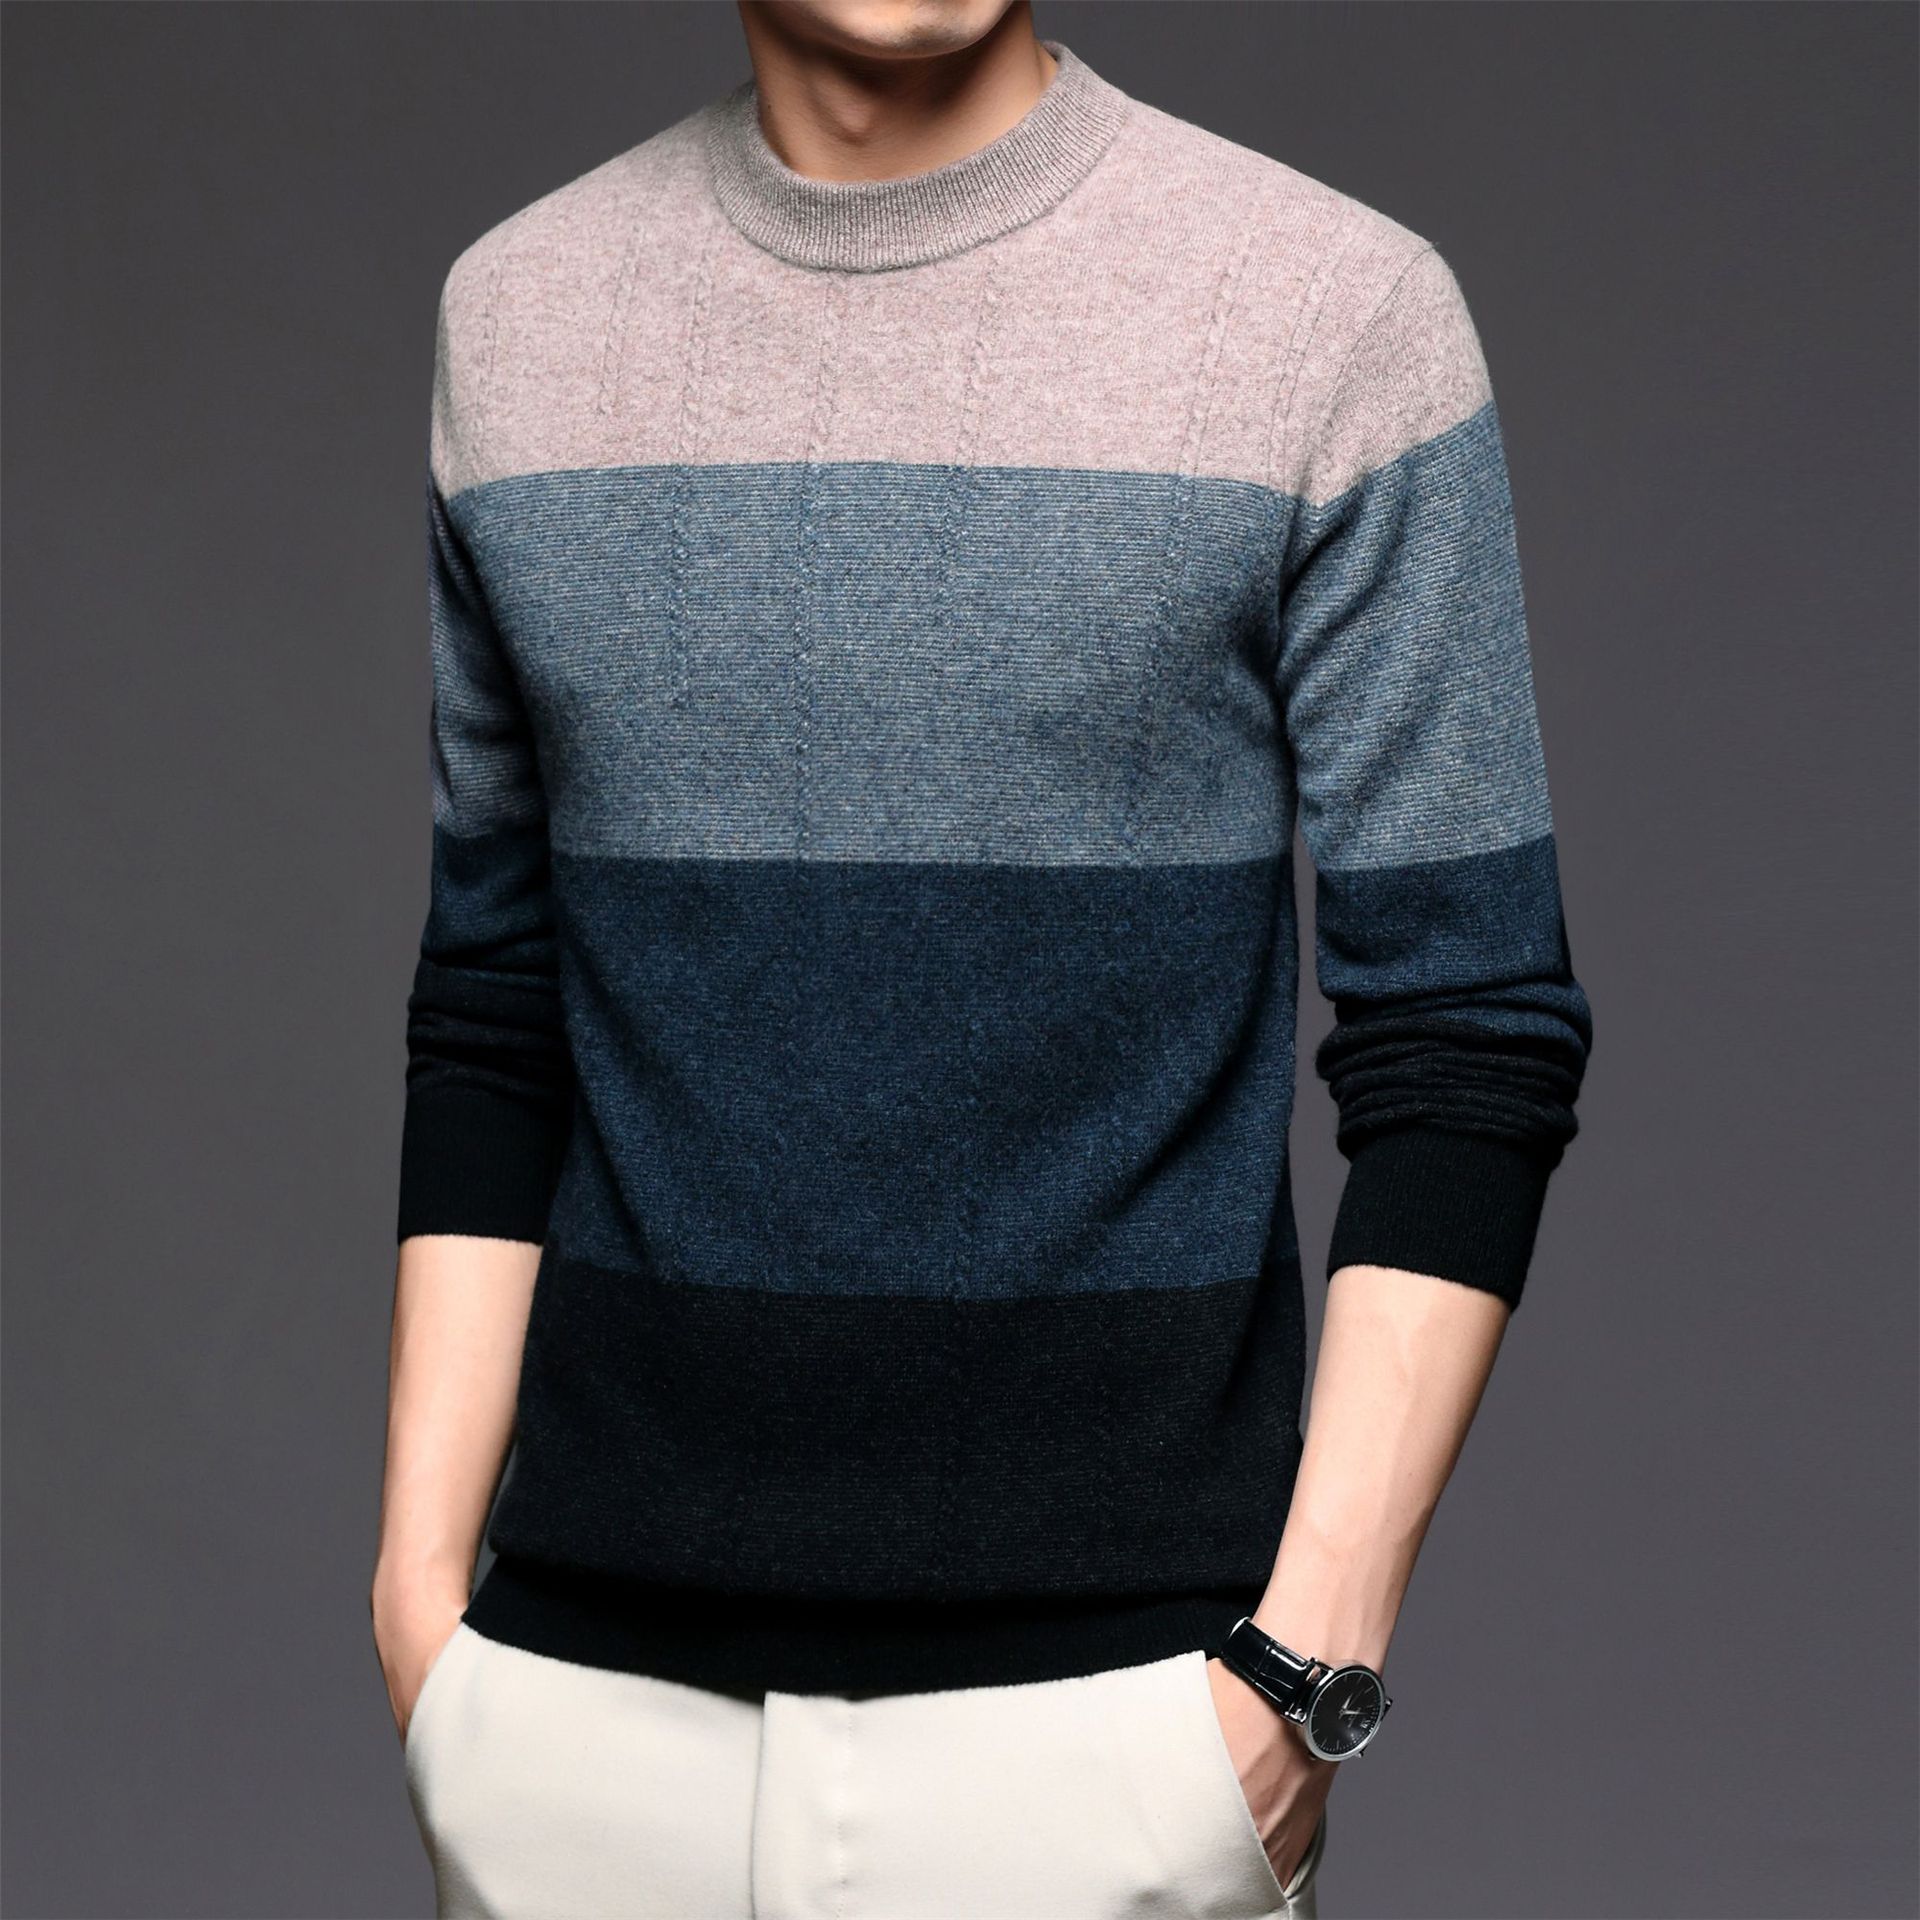 urban Middle and old age man Wool keep warm sweater 2020 winter new pattern T-shirts Socket Cardigan